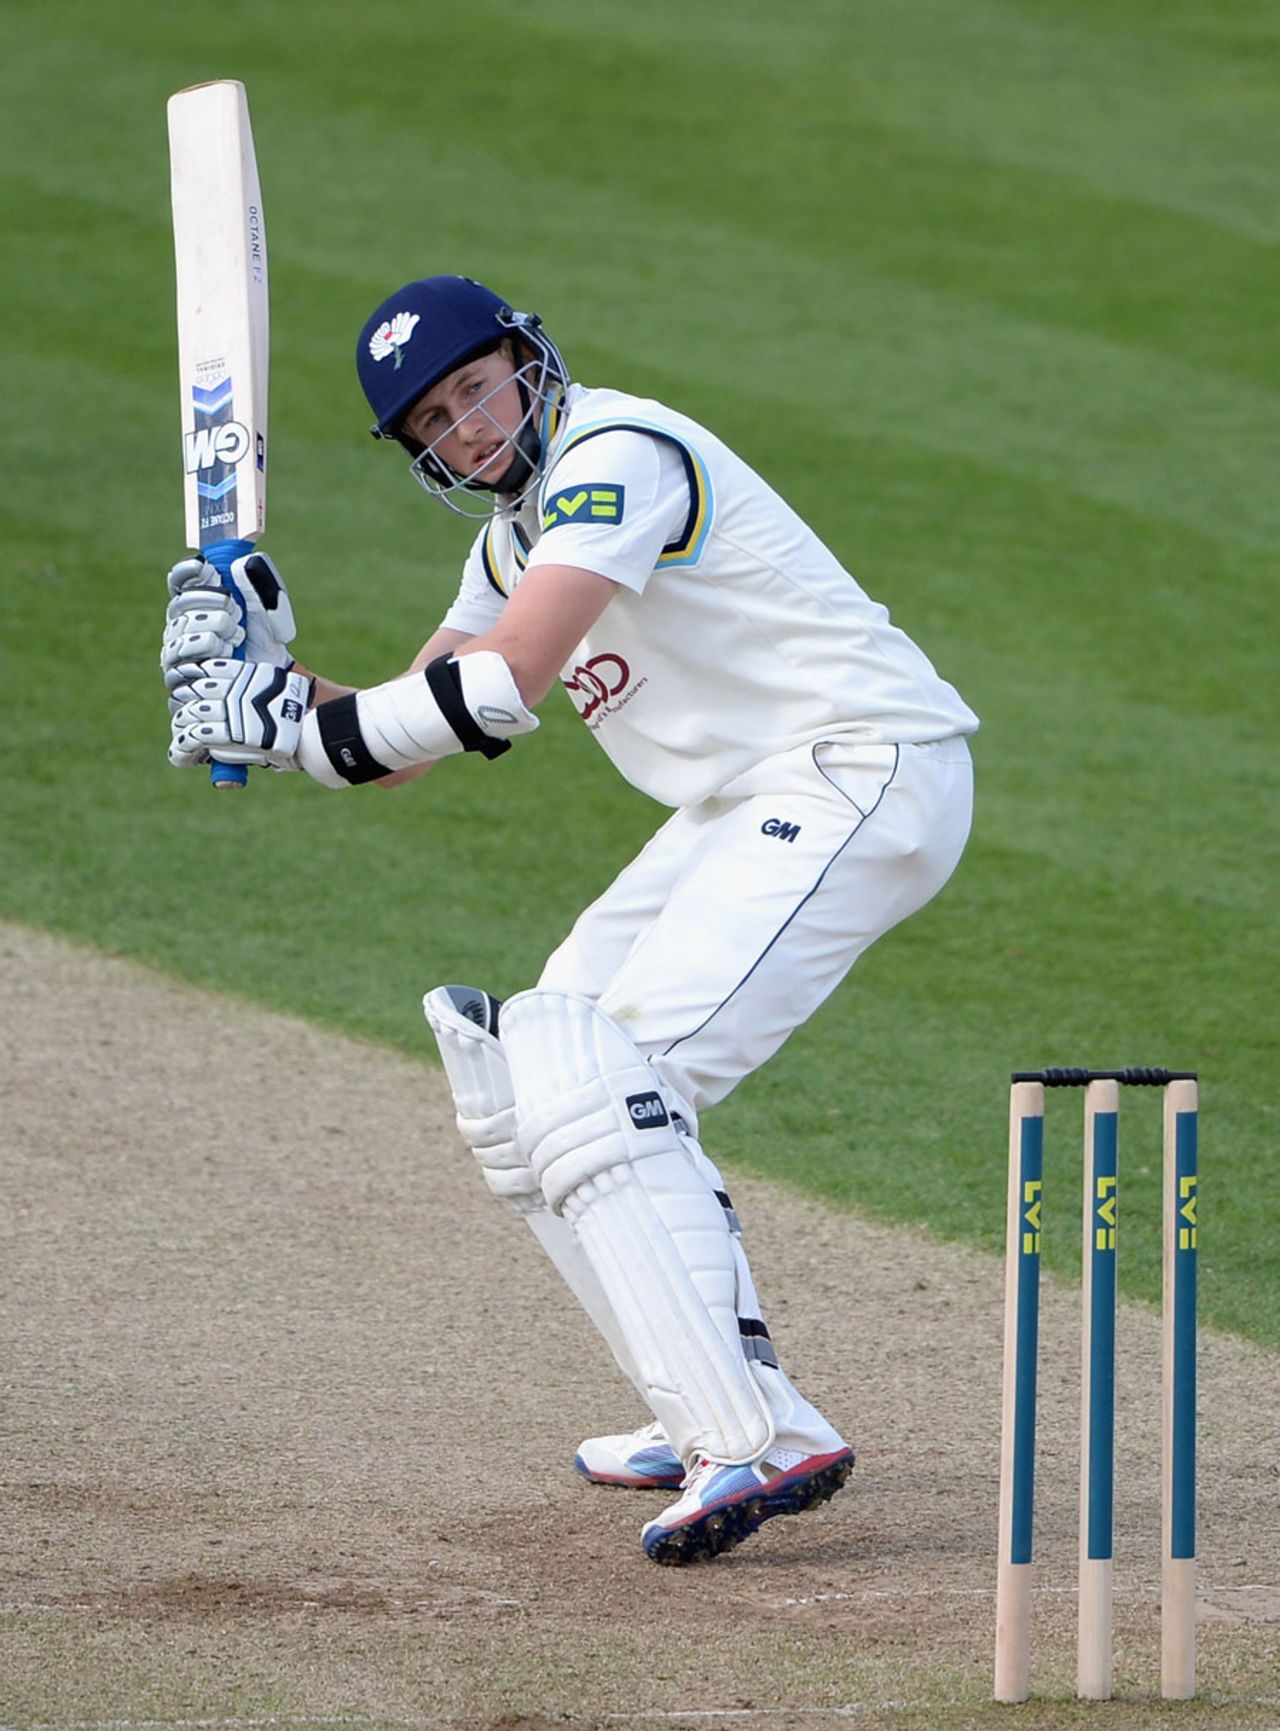 Joe Root made 49 before being bowled, Durham v Yorkshire, County Championship, Division One, Chester-le-Street, 2nd day, April 25, 2013